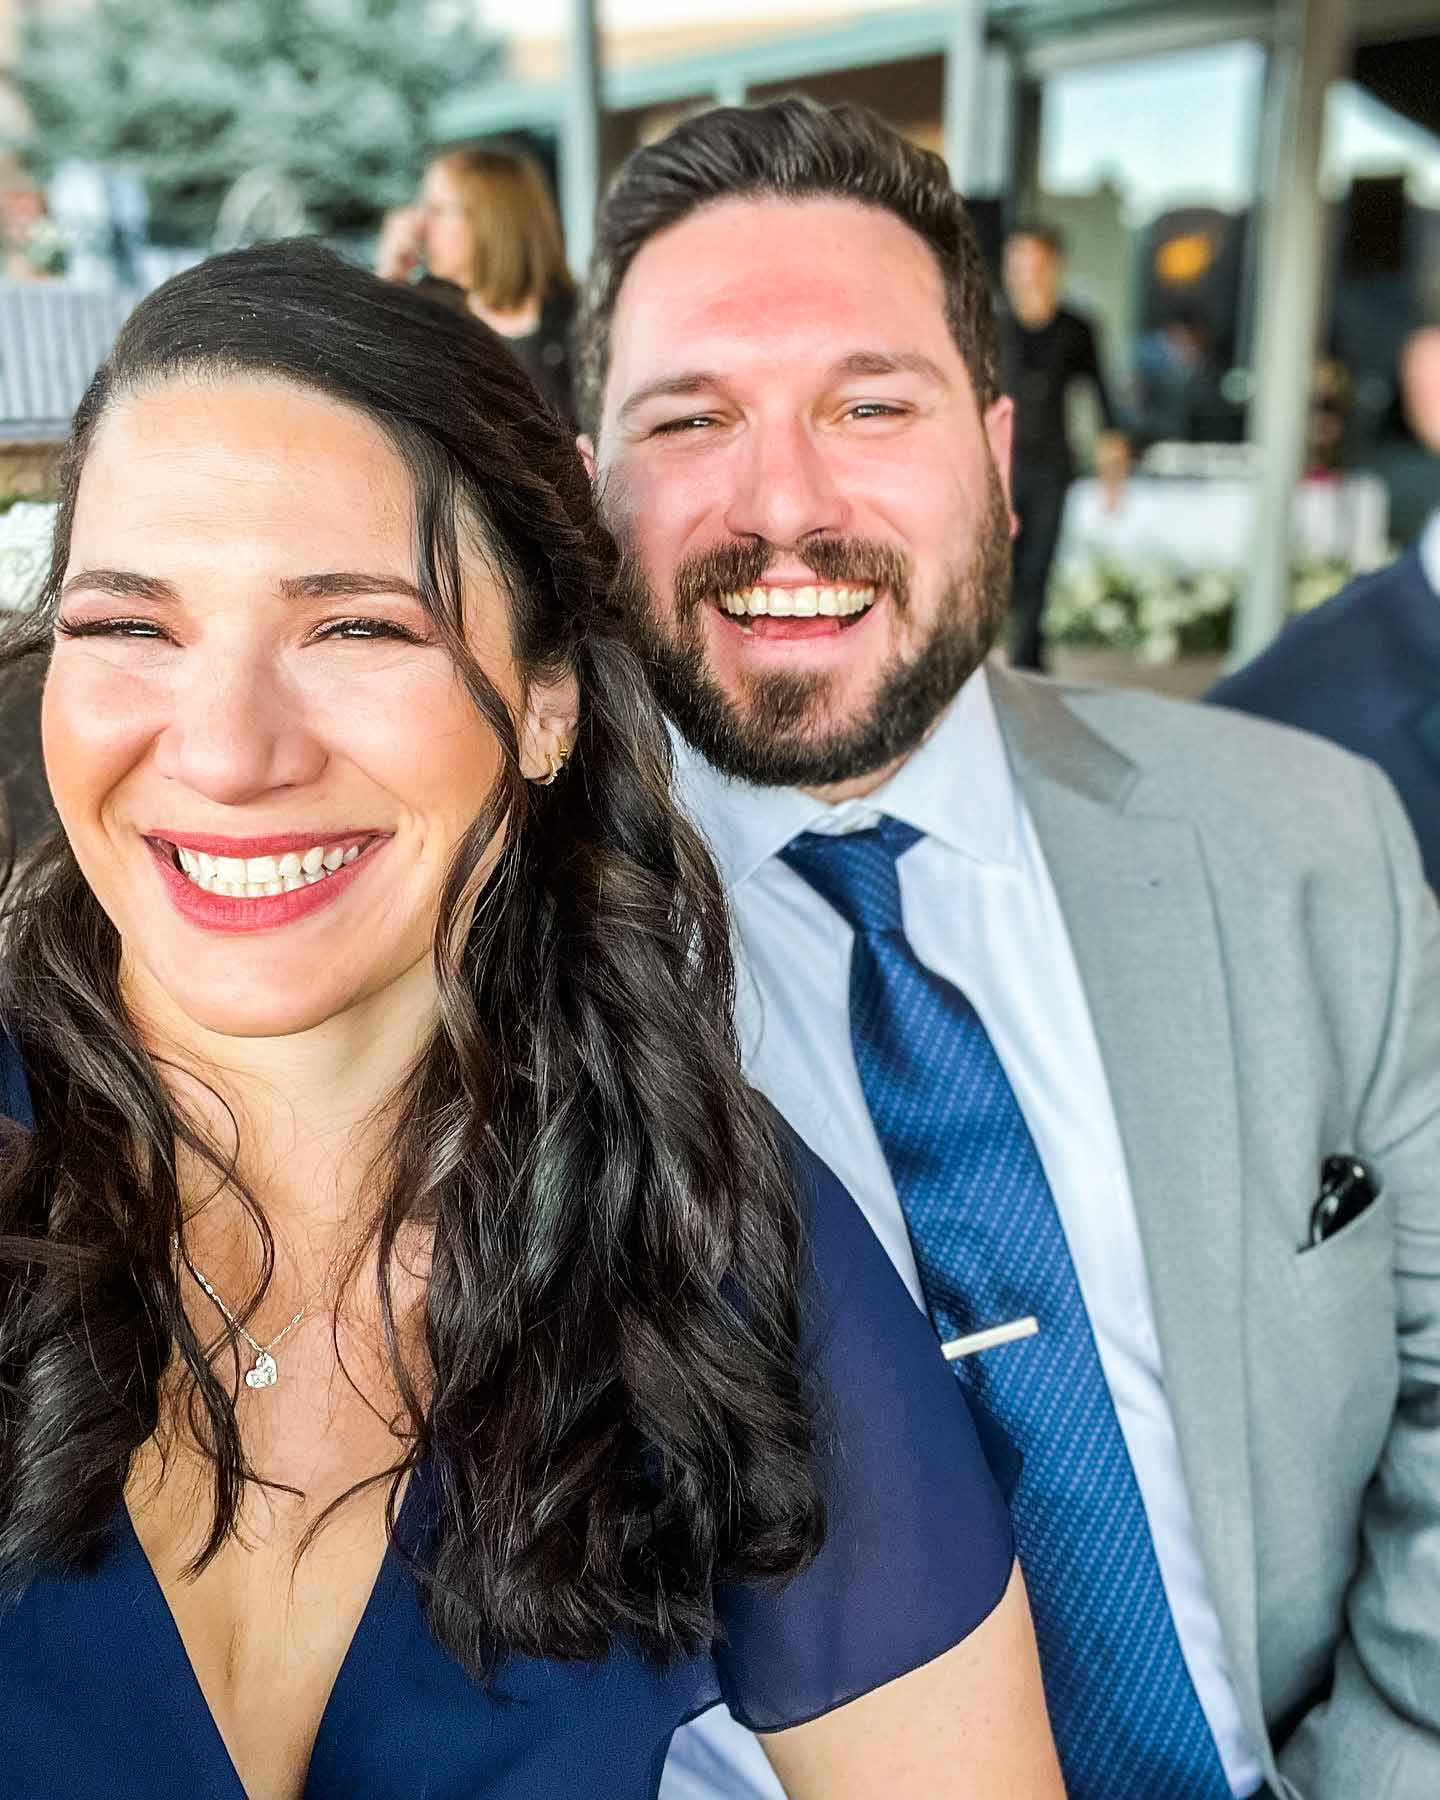 Husband and Wife smile in formal clothing at Wedding